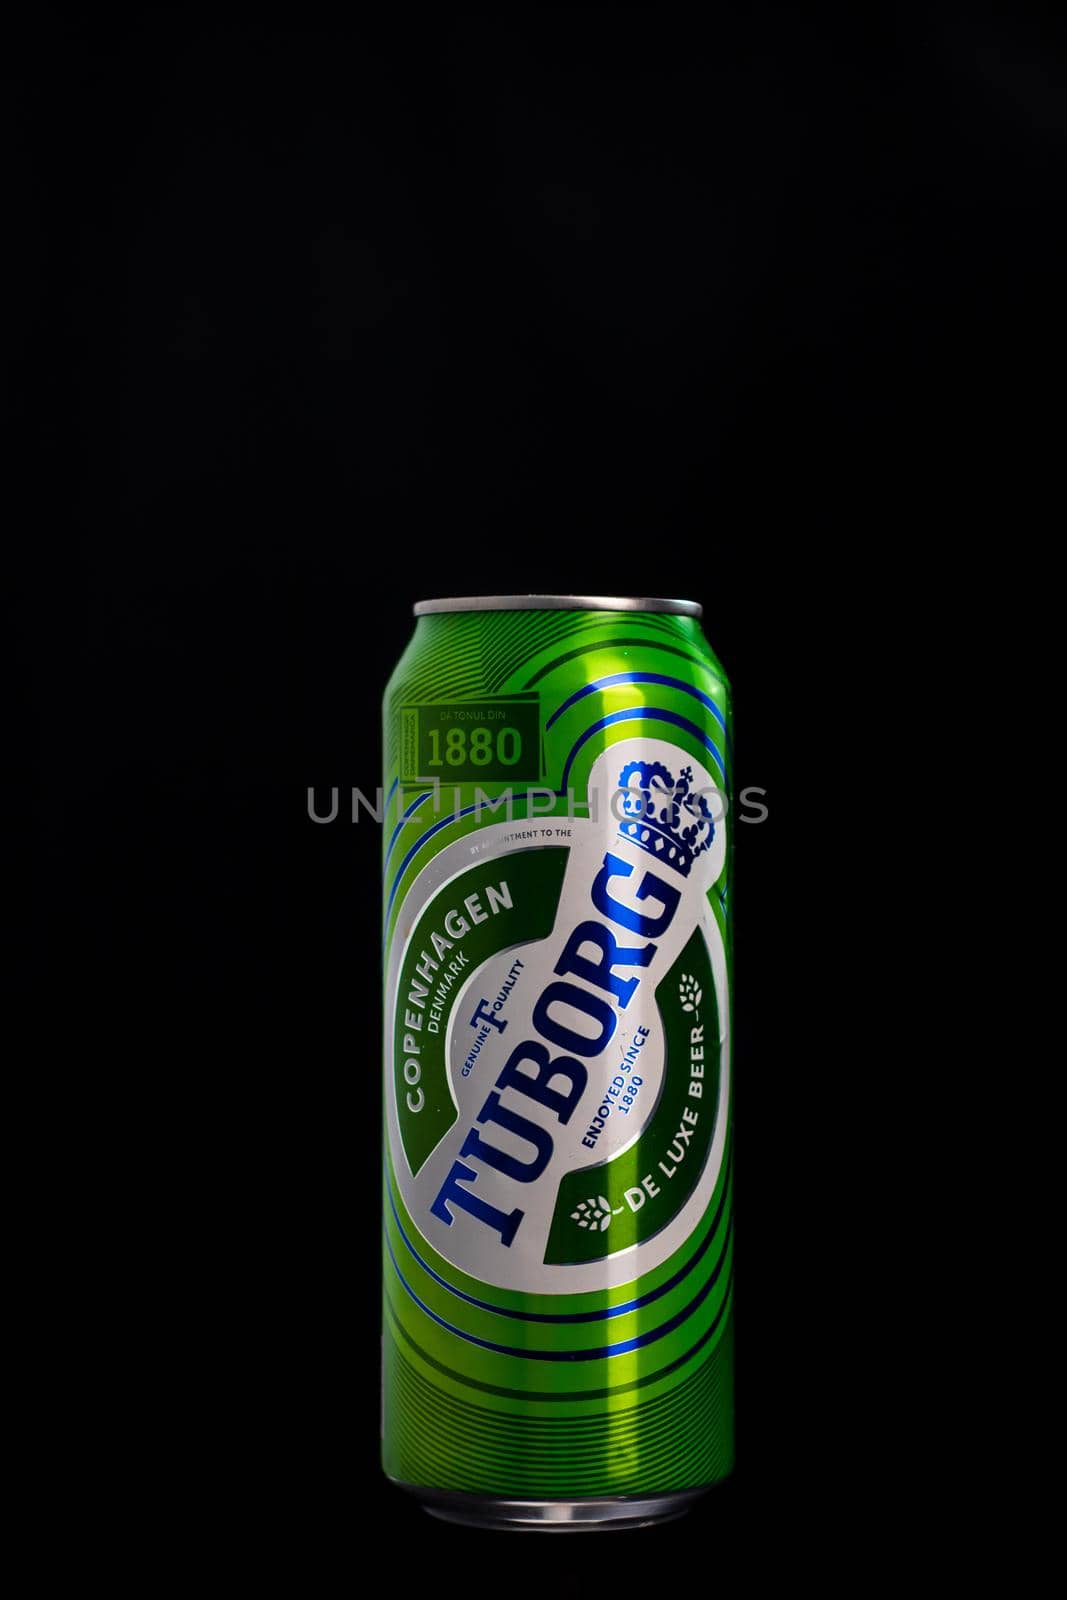 Tuborg beer can isolated on black background. Bucharest, Romania, 2020 by vladispas